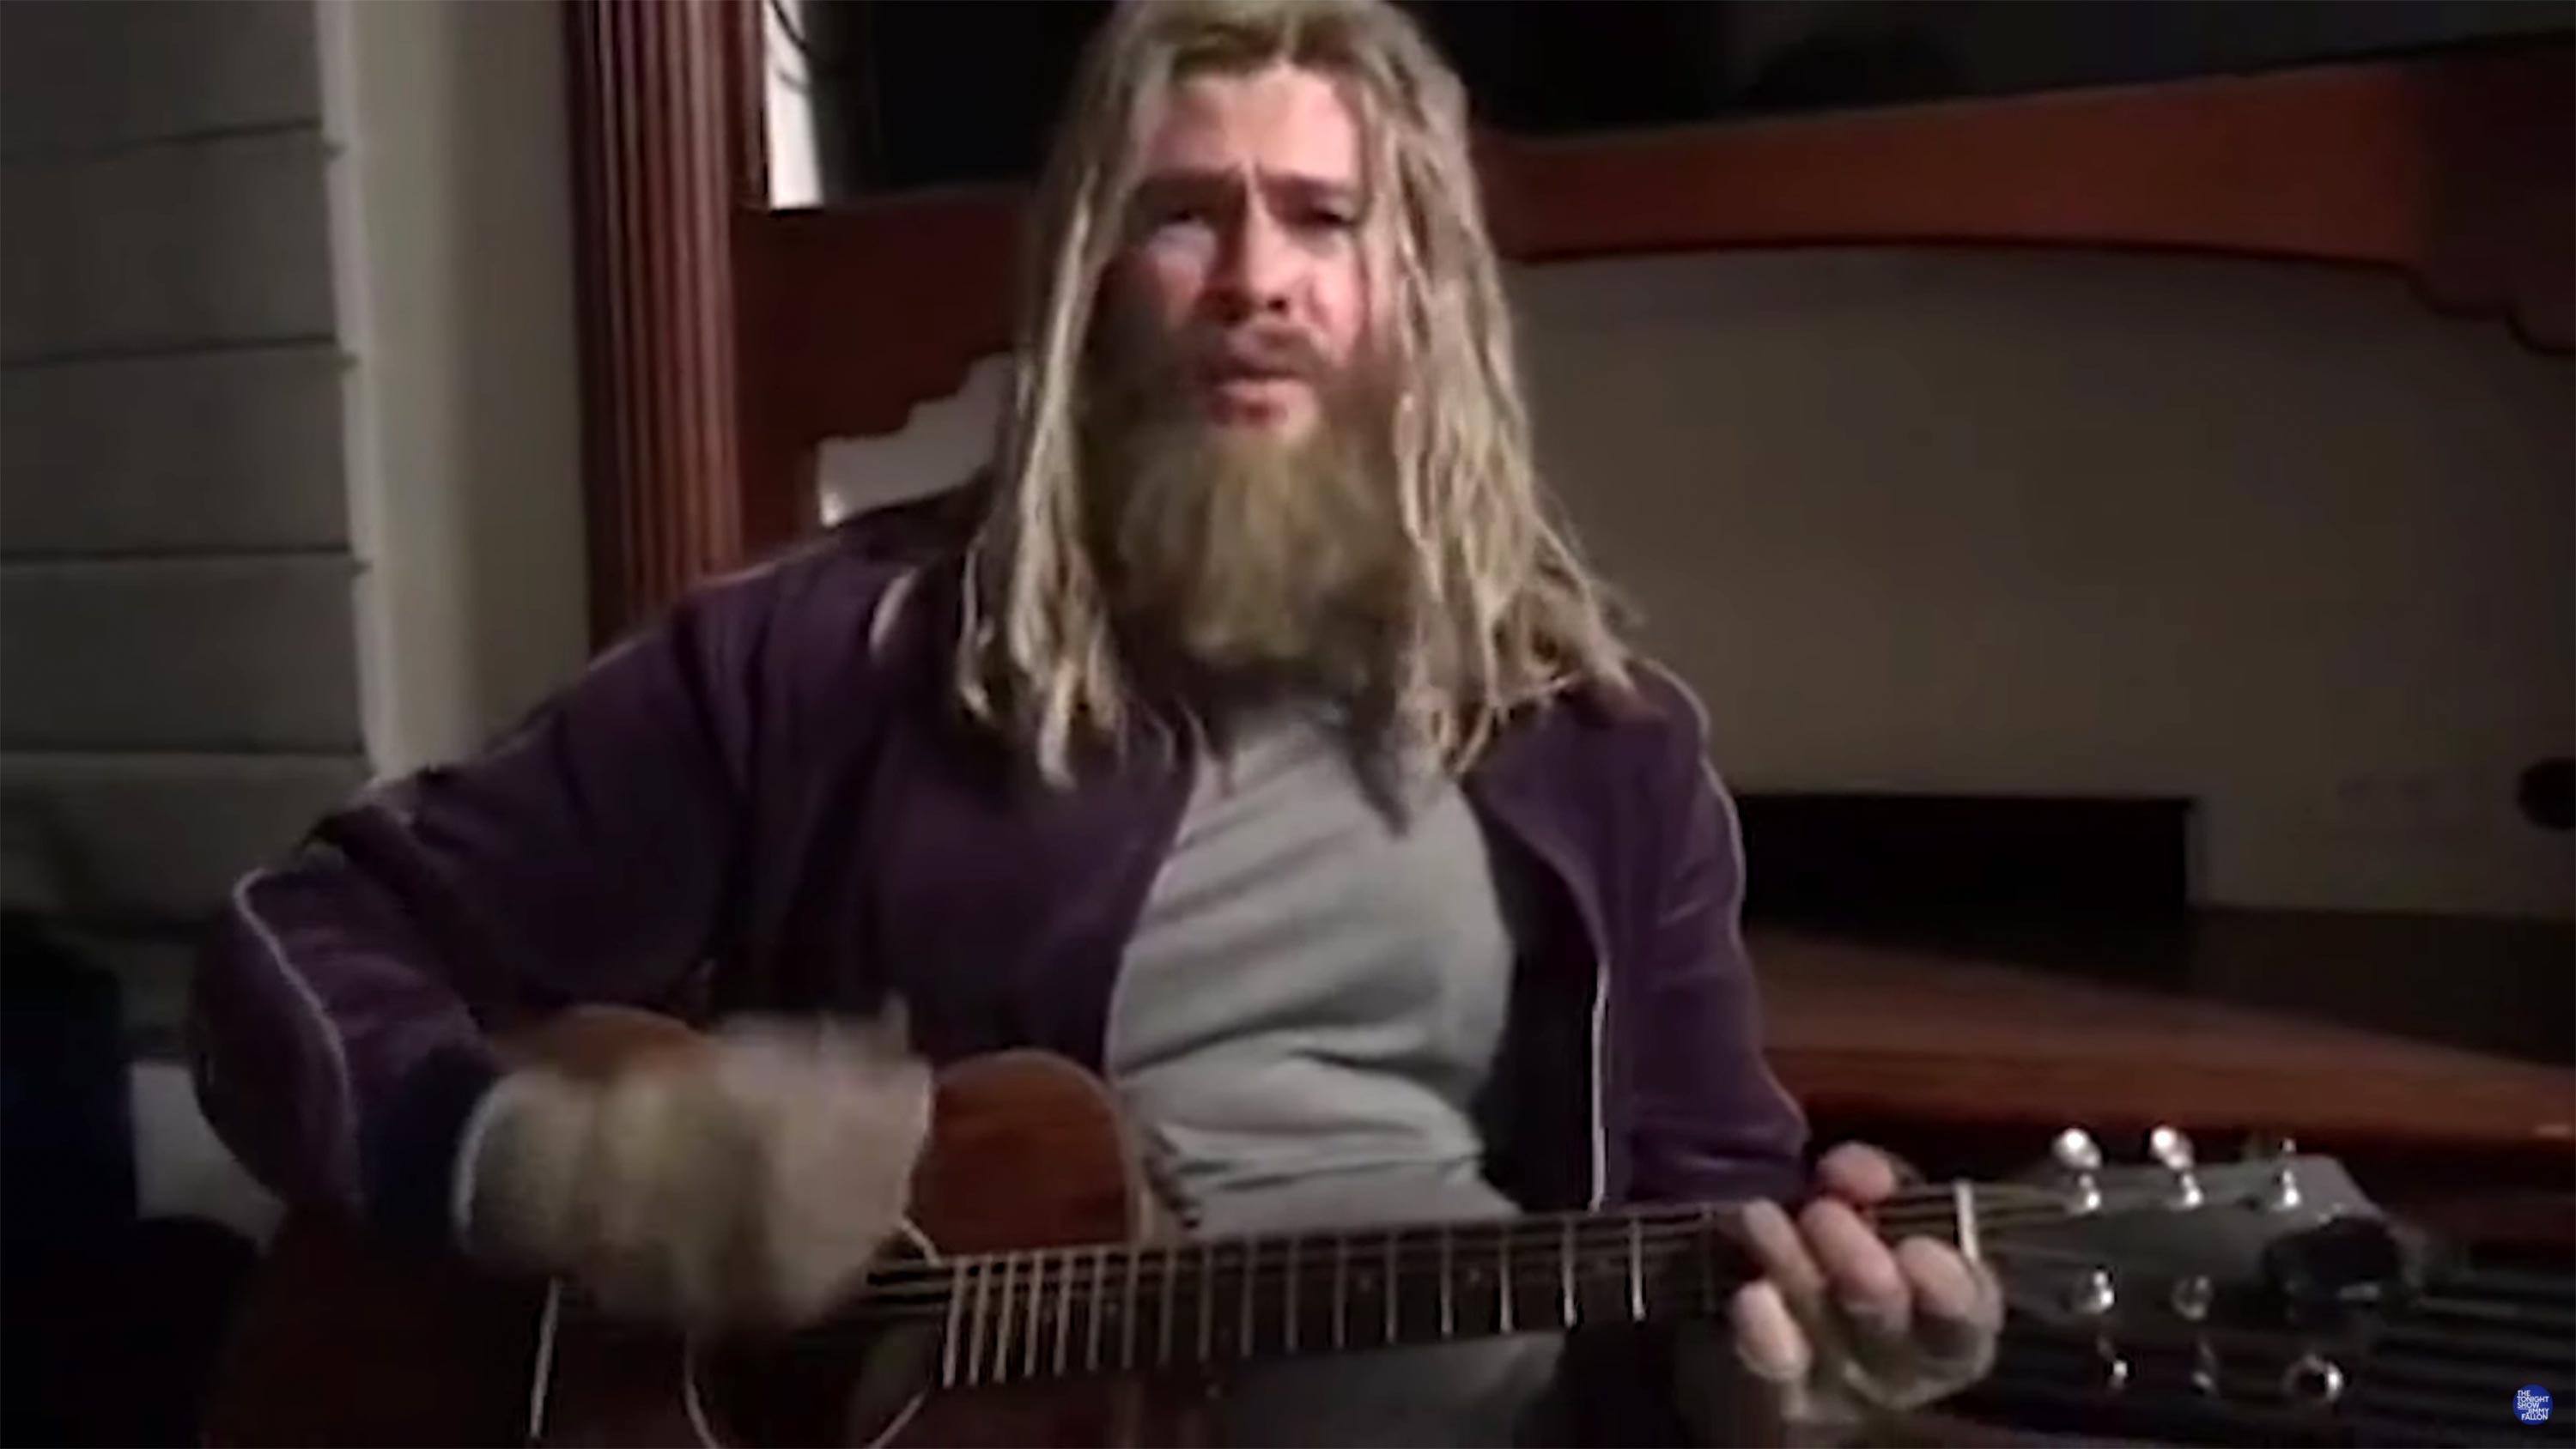 See Chris Hemsworth's "Fat Thor" Cover Nine Inch Nails' "Hurt" on